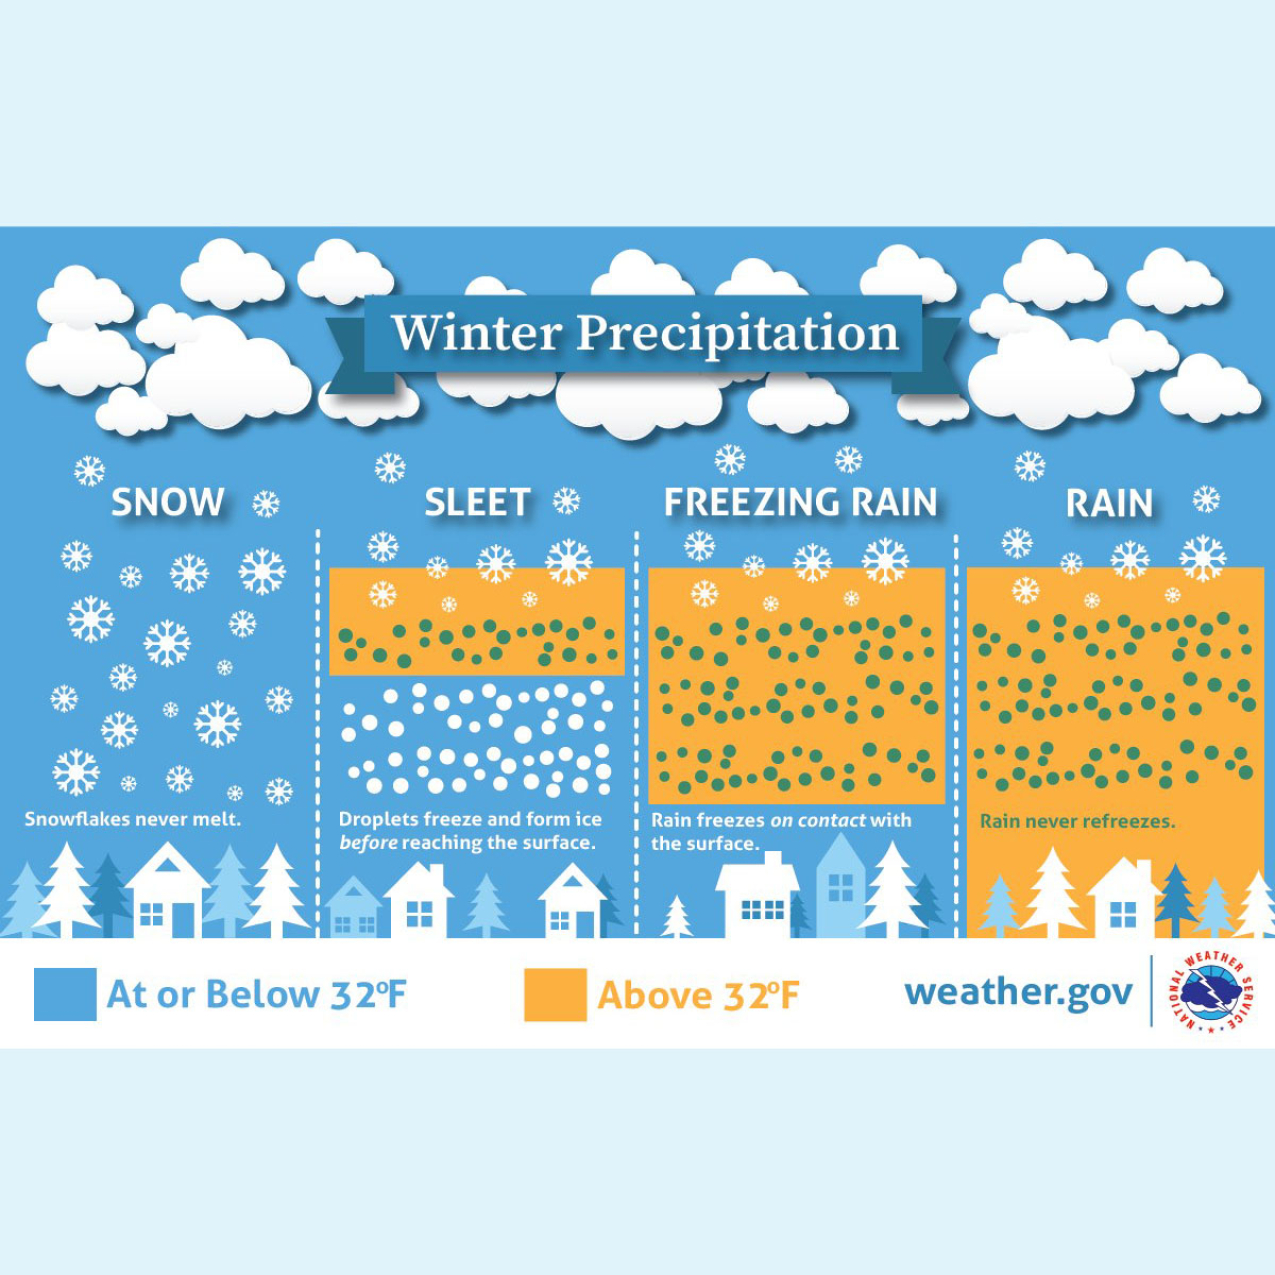 A graphic showing how winter precipitation forms. Snow forms when the temperature is below 32 degrees F from the cloud to the ground. Sleet forms if a layer of warm air causes snowflakes to turn to rain, but then another layer of below 32 degrees F causes droplets to freeze before reaching the ground. Freezing rain happens when a larger layer of warm air causes the snowflakes to melt, and they refreeze when hitting the ground. Rain never refreezes.